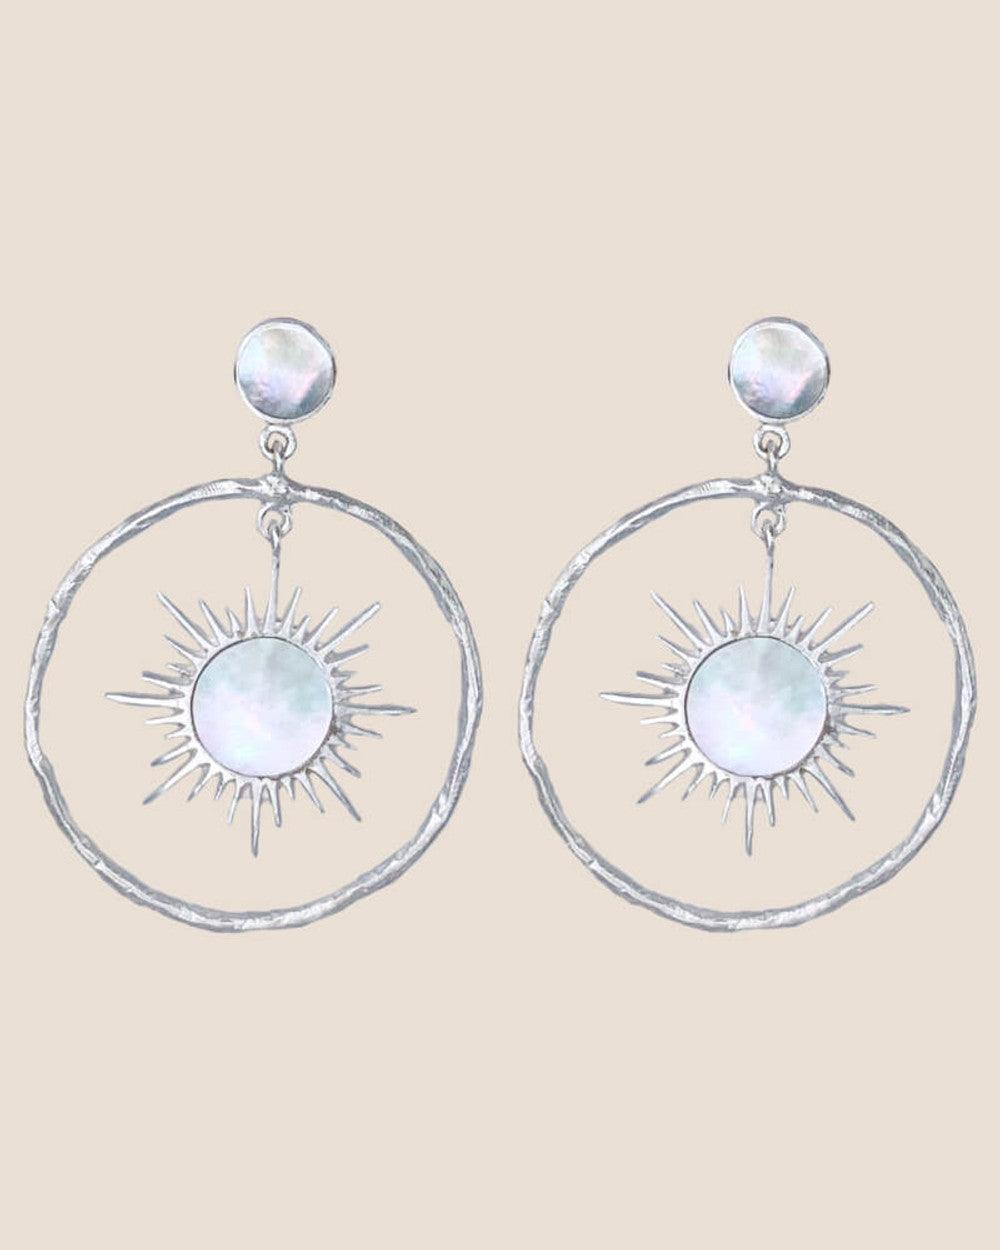 Northern Star- Silver Earring - Expat Life Style